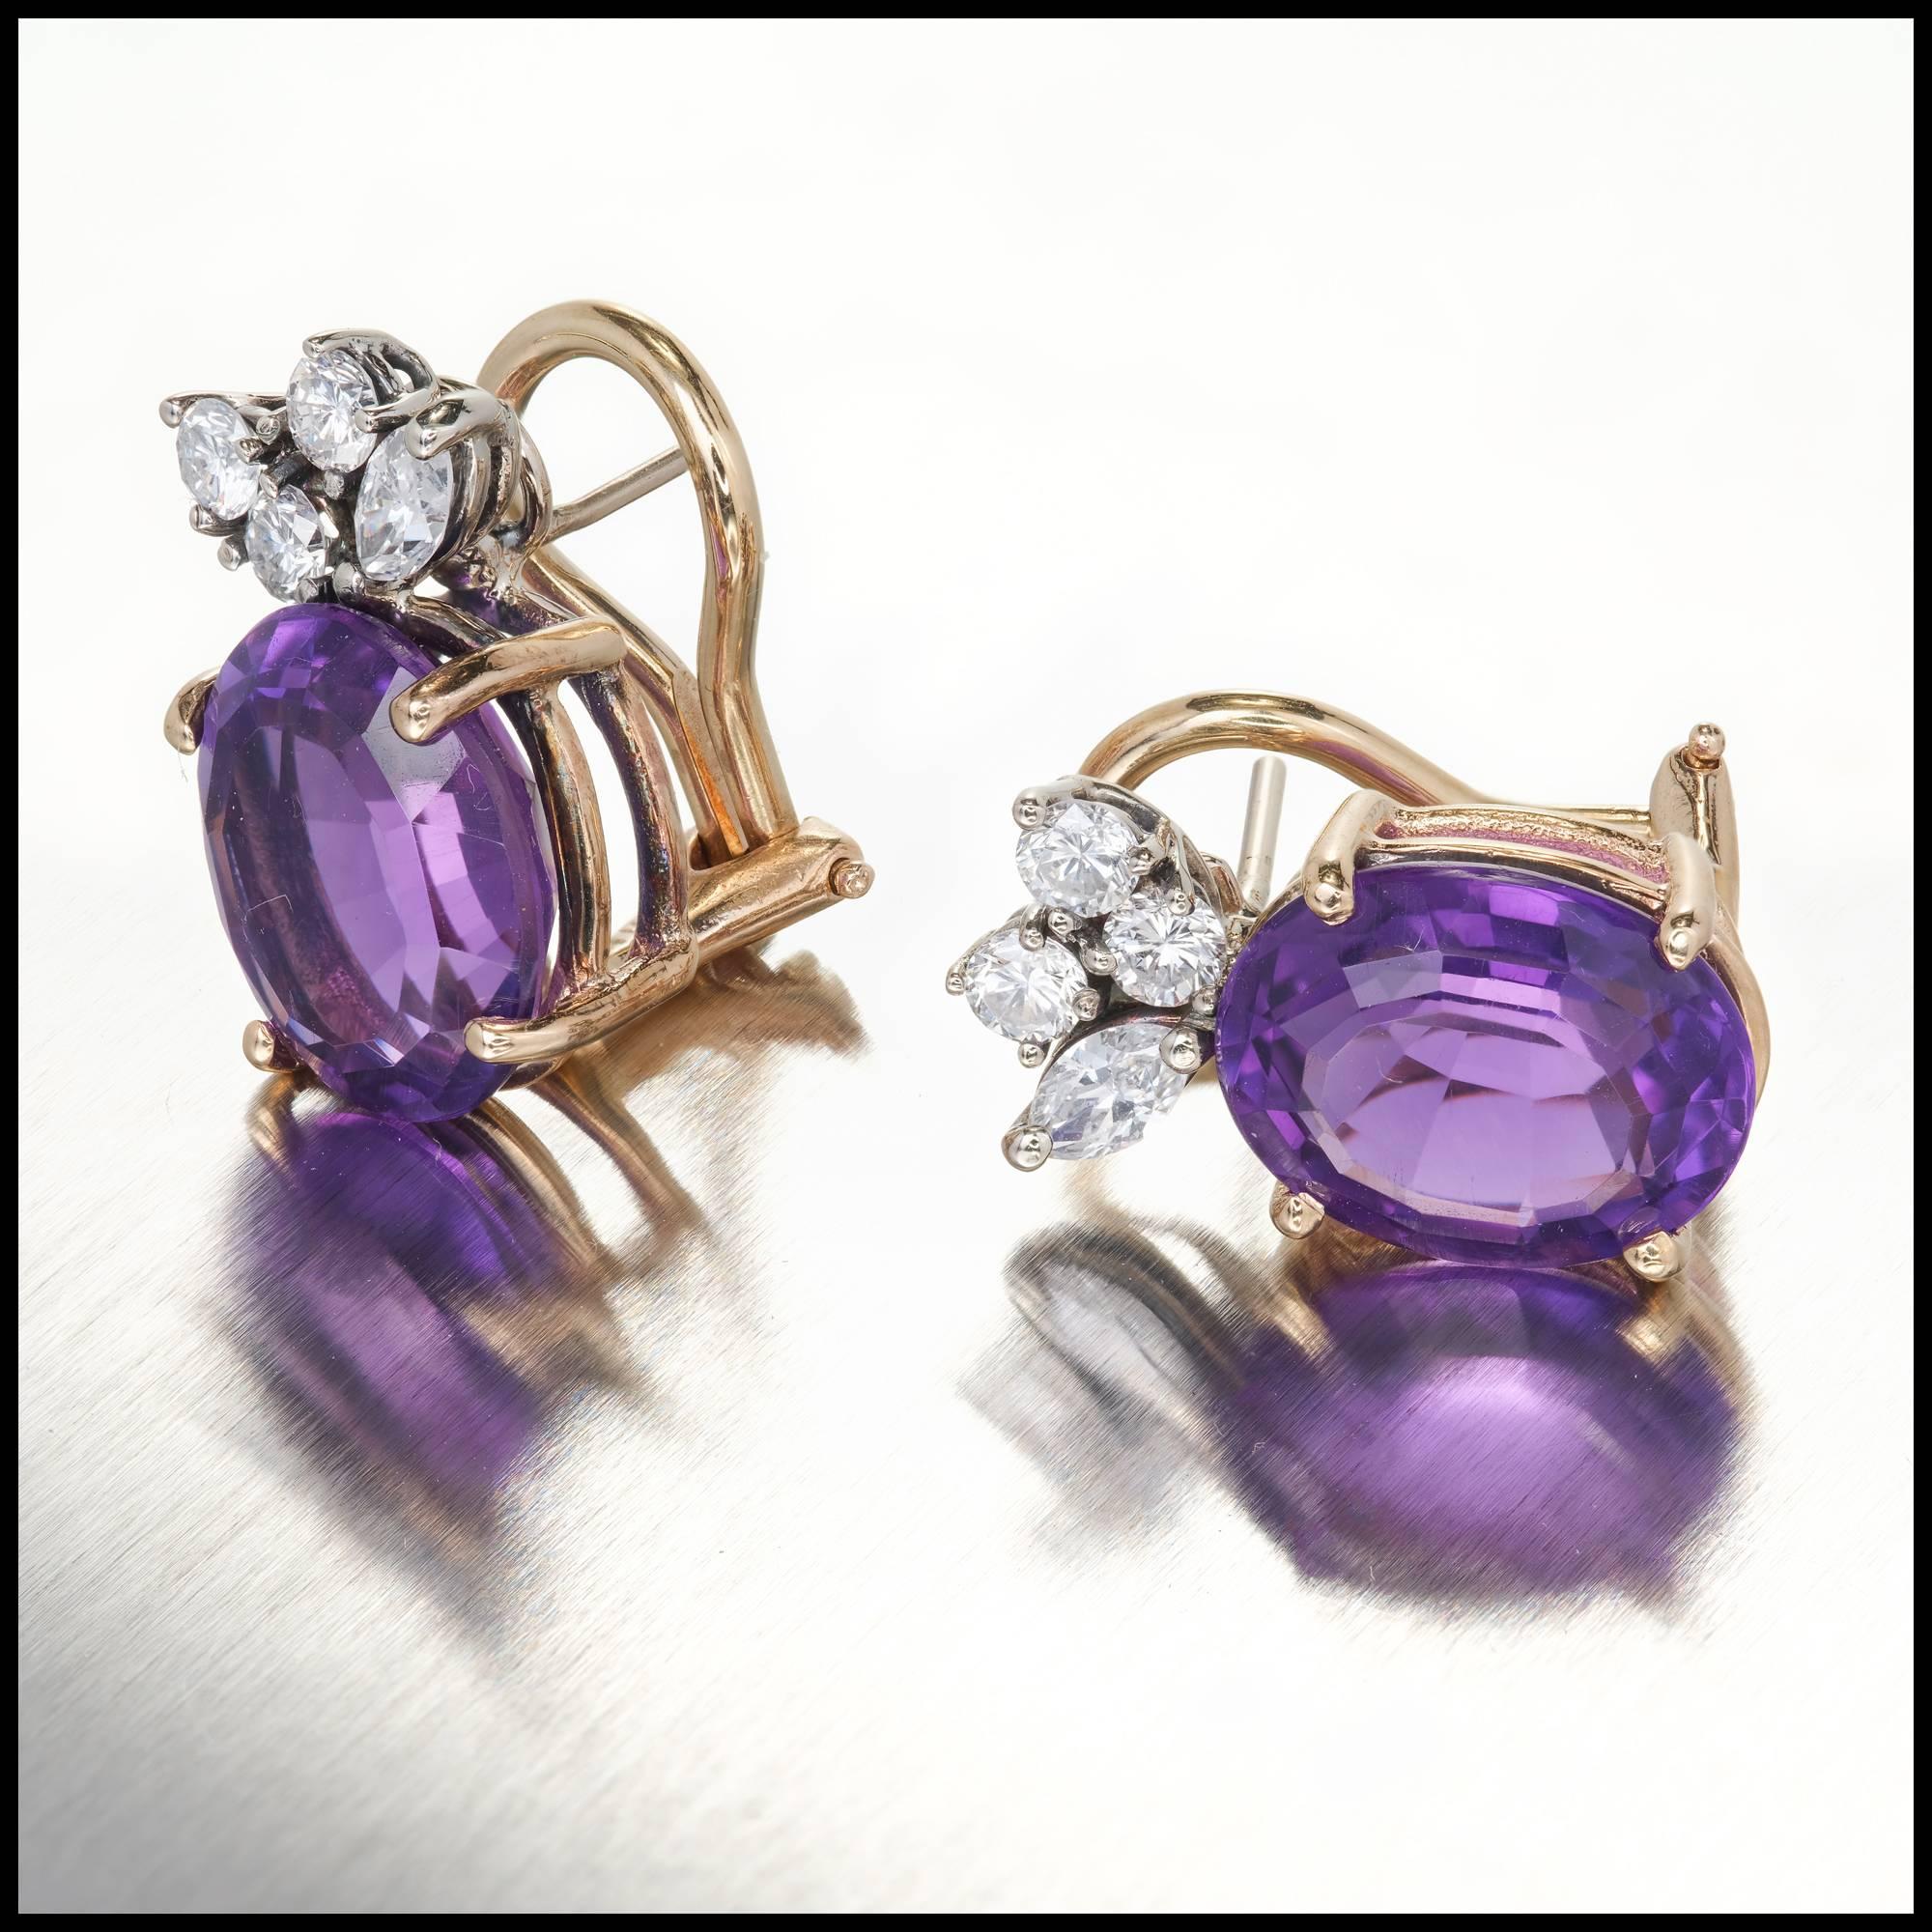 Vintage 1960 clip post oval Amethyst 14k yellow gold earrings with bright white Diamond accents in white gold.

2 oval purple Amethyst, approx. total weight 5.0cts, VS, 10.66 x 8.6 x 5.89mm
6 round full cut Diamonds, approx. total weight .36cts, G,